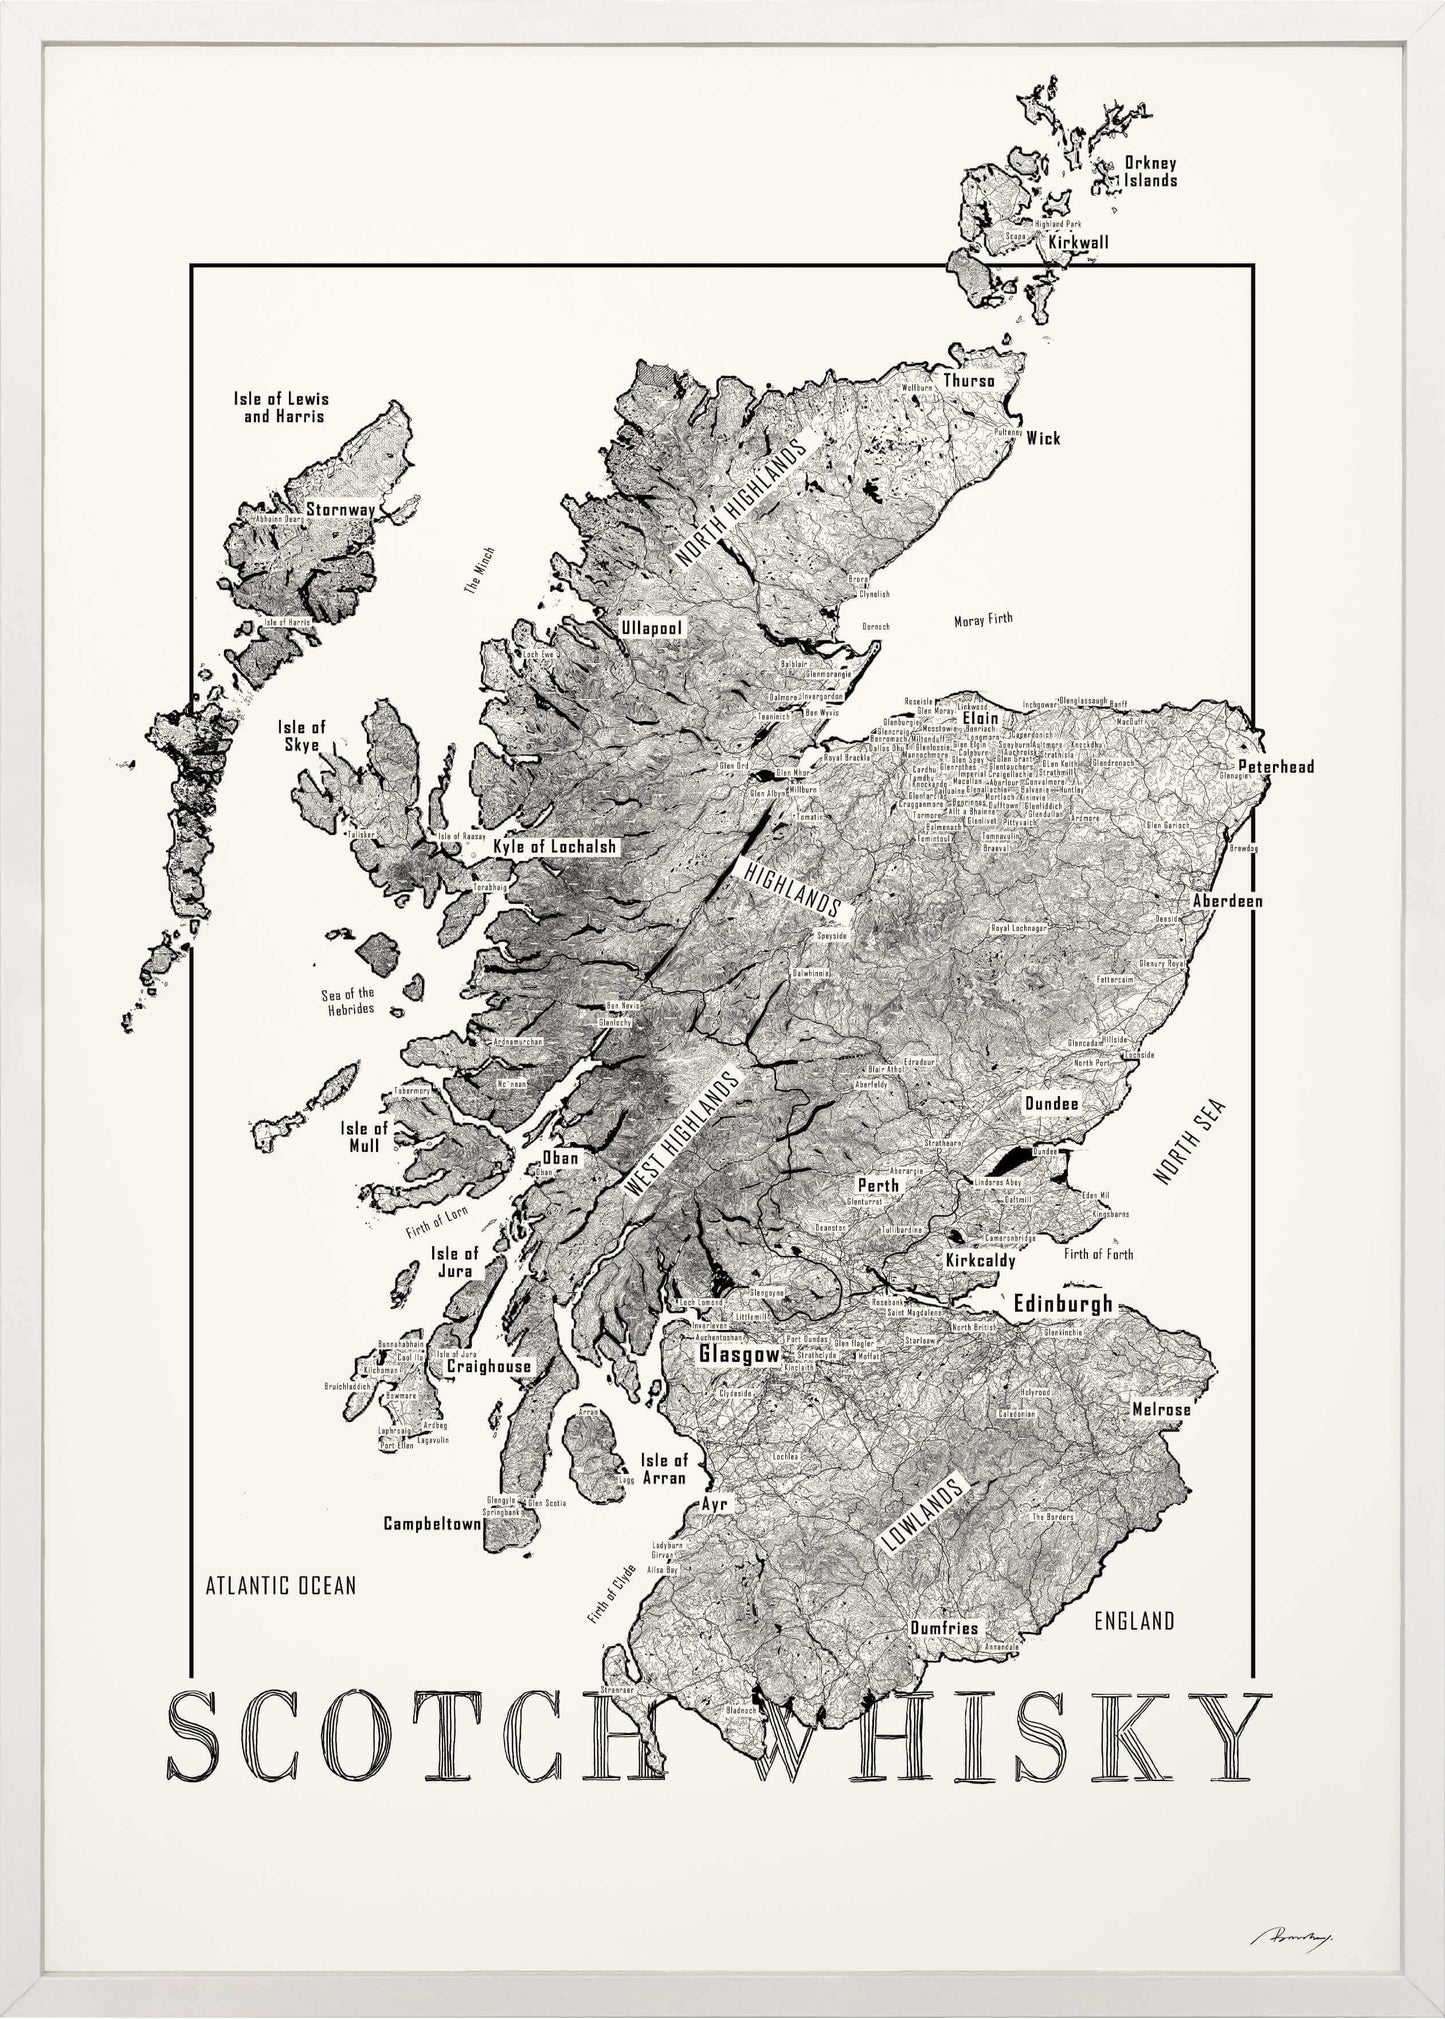 Scotch region whisky map poster. Exclusive wine map posters. Premium quality wine maps printed on environmentally friendly FSC marked paper.